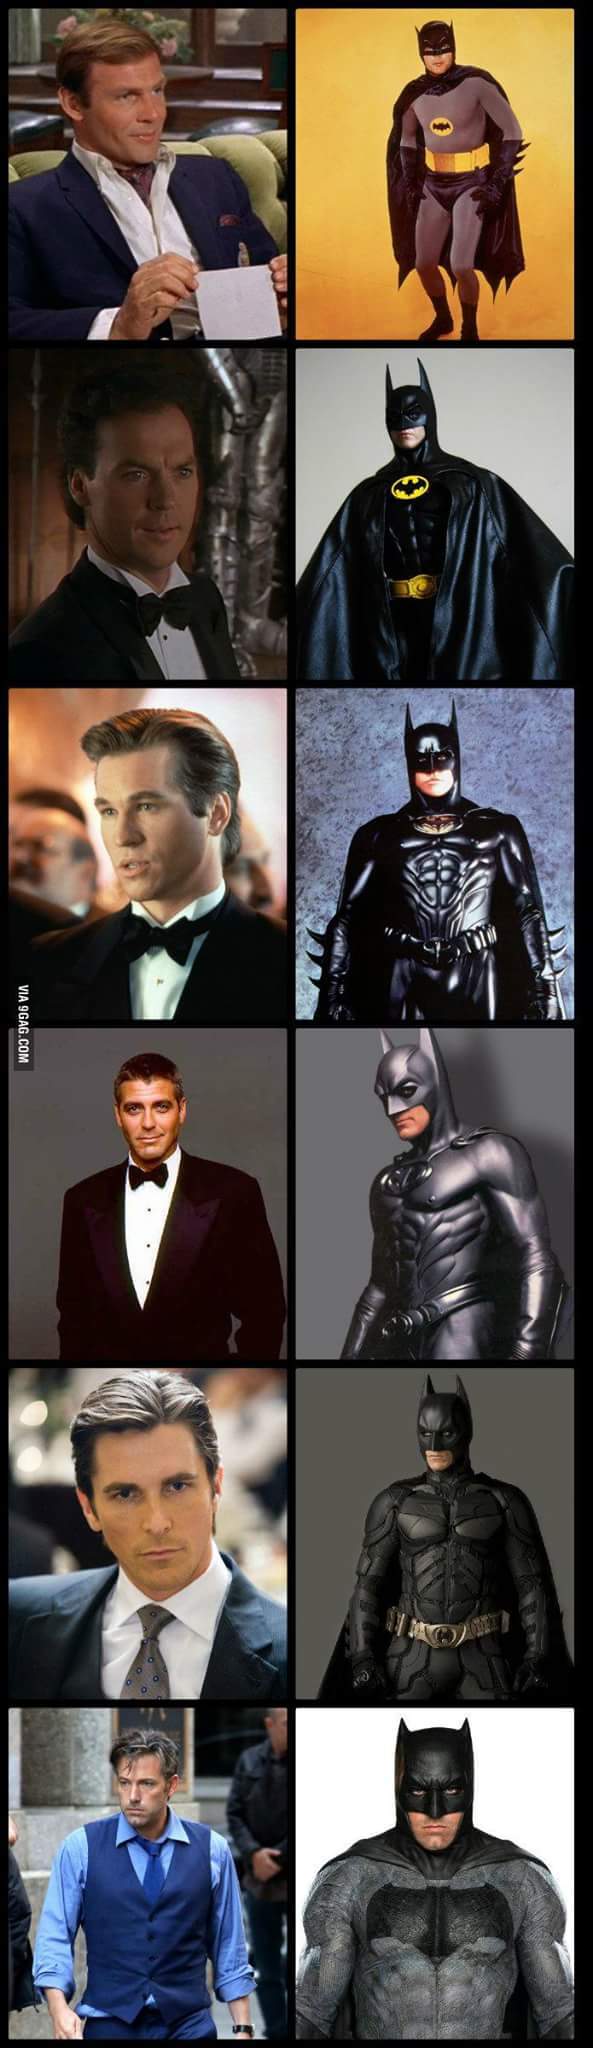 Christian Bale suit for the win! Ben Affleck looks pretty awful :( - meme